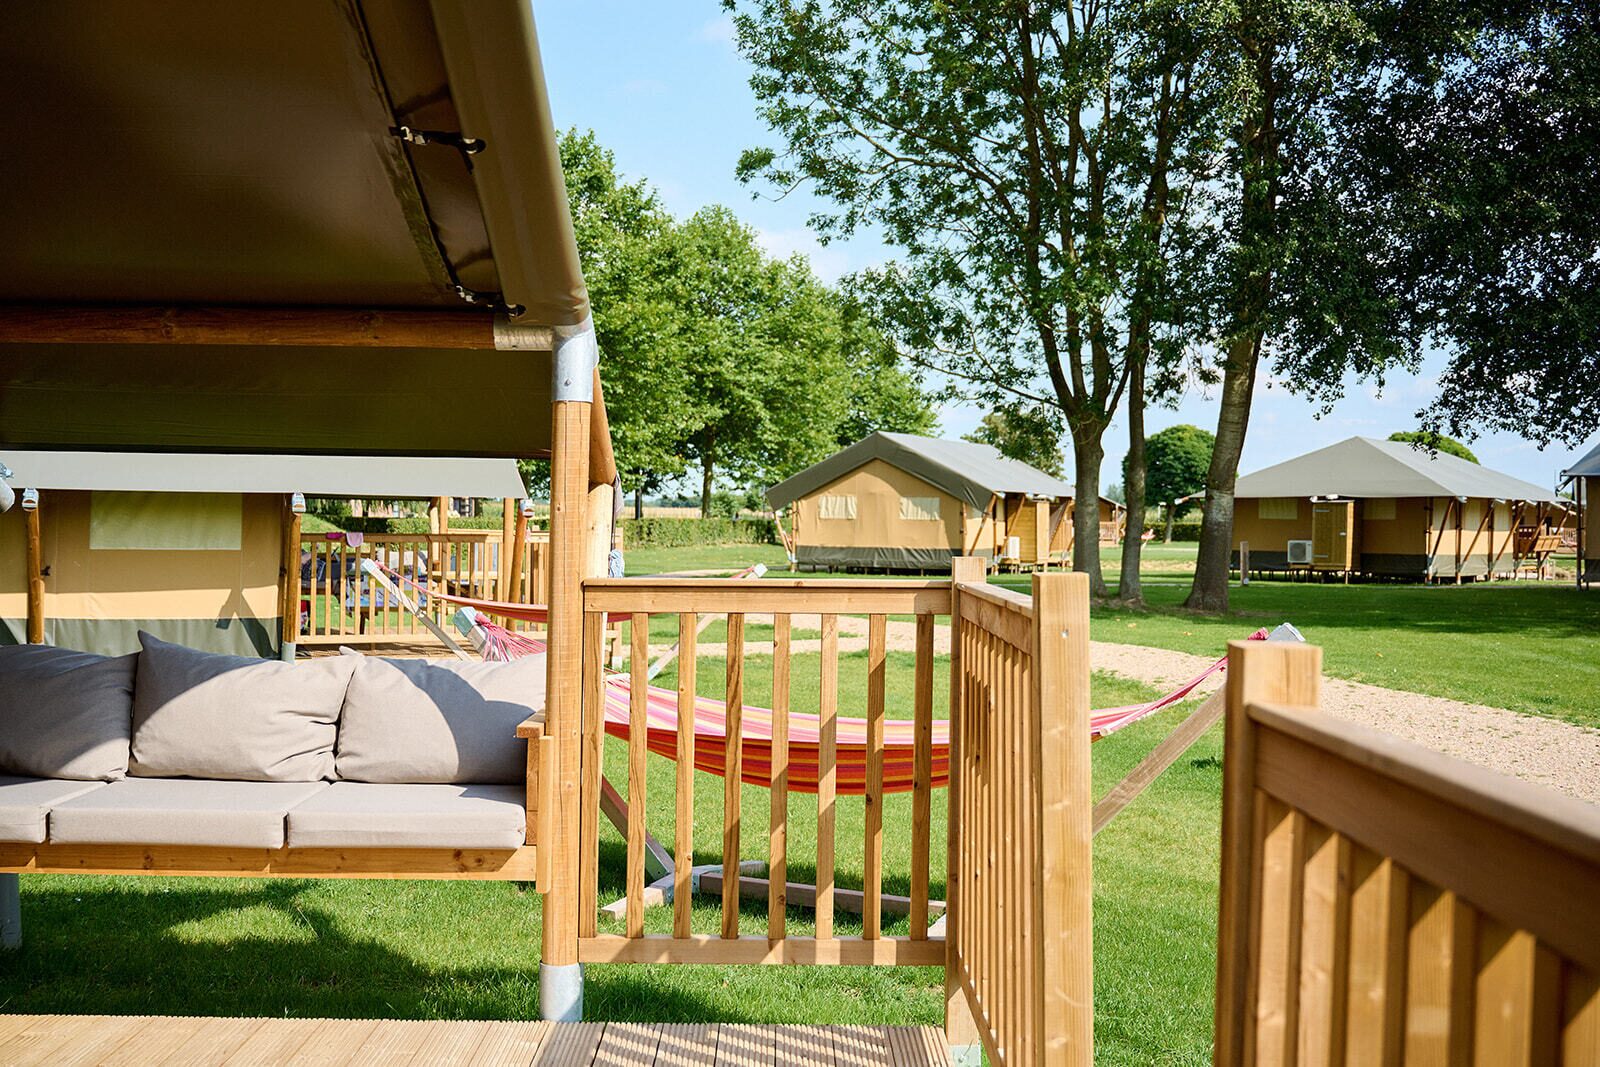 Camping Betuwe | Villatent Compact | 2 pers.